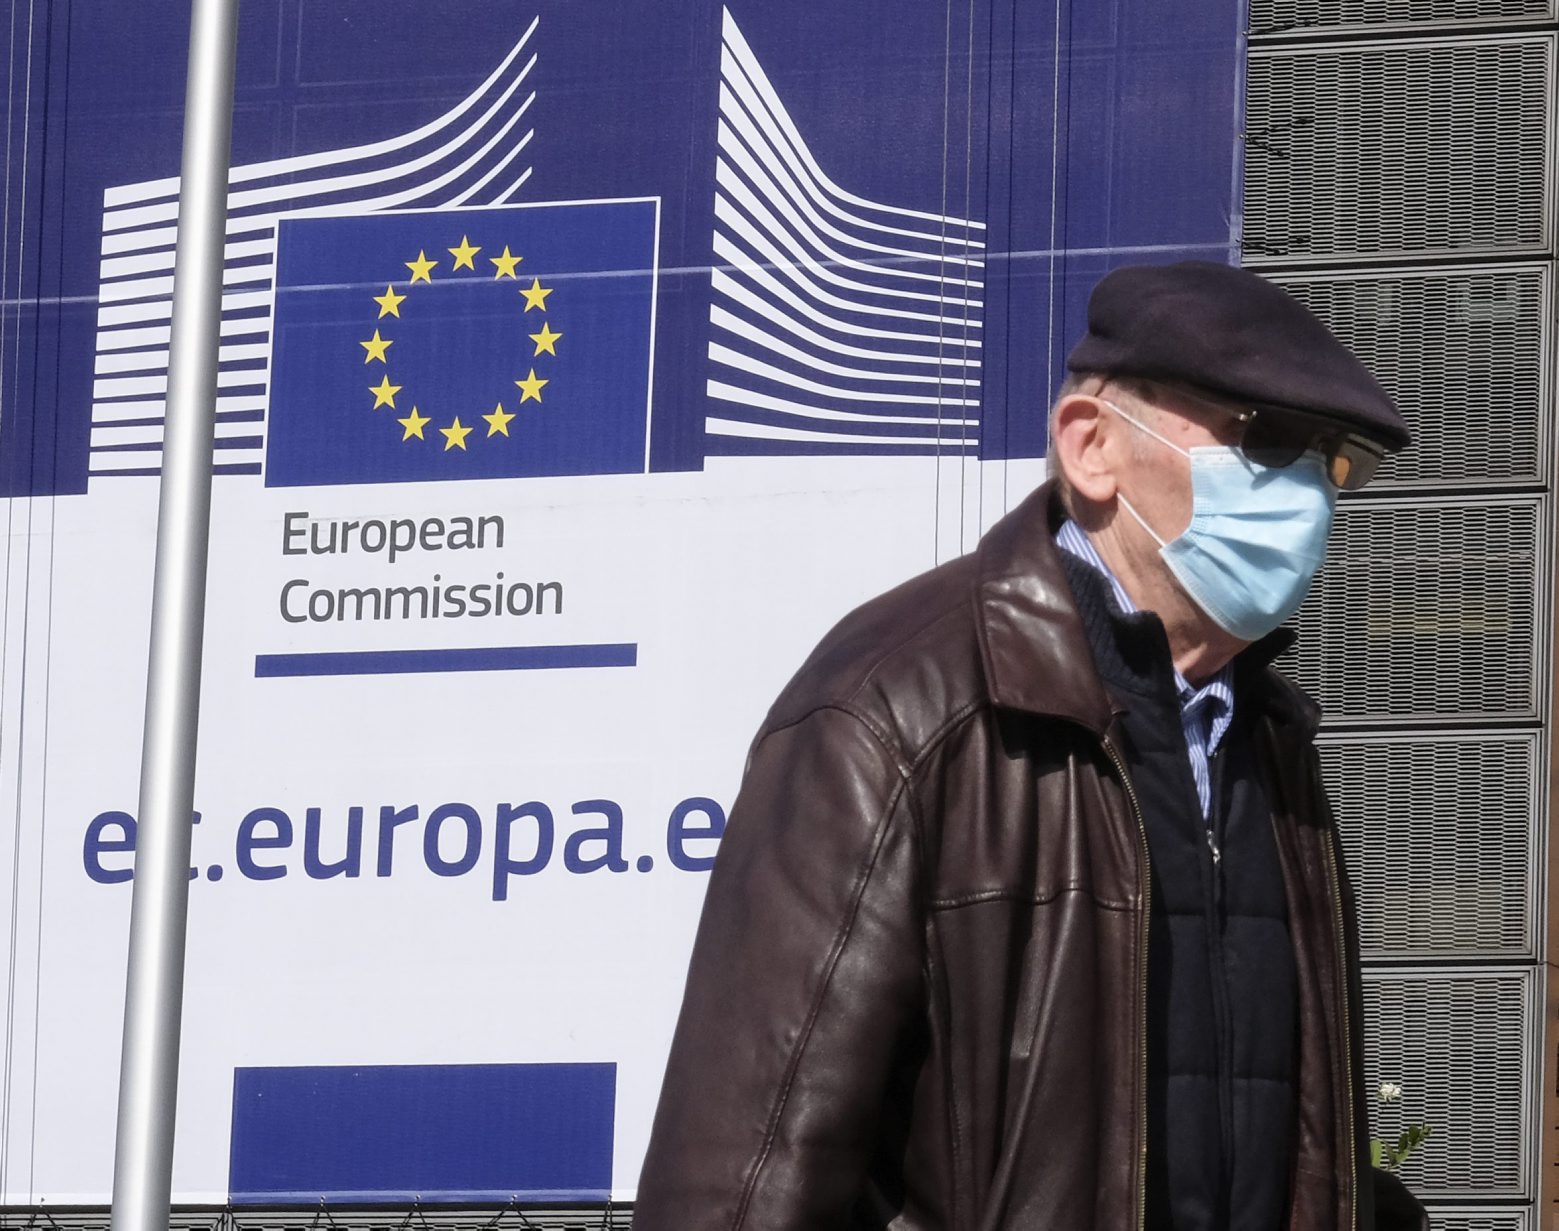 epa08347864 A pedestrians wth a face mask in front of the European Commission headquarters in Brussels, Belgium, 07 April 2020. In order to contain the spread of coronavirus, Belgium is implementing confinement guidelines for the public which is scheduled to be in place until 19 April 2020. Only supermarkets and essential trade will remain open.  EPA/OLIVIER HOSLET BELGIUM CORONAVIRUS PANDEMIC